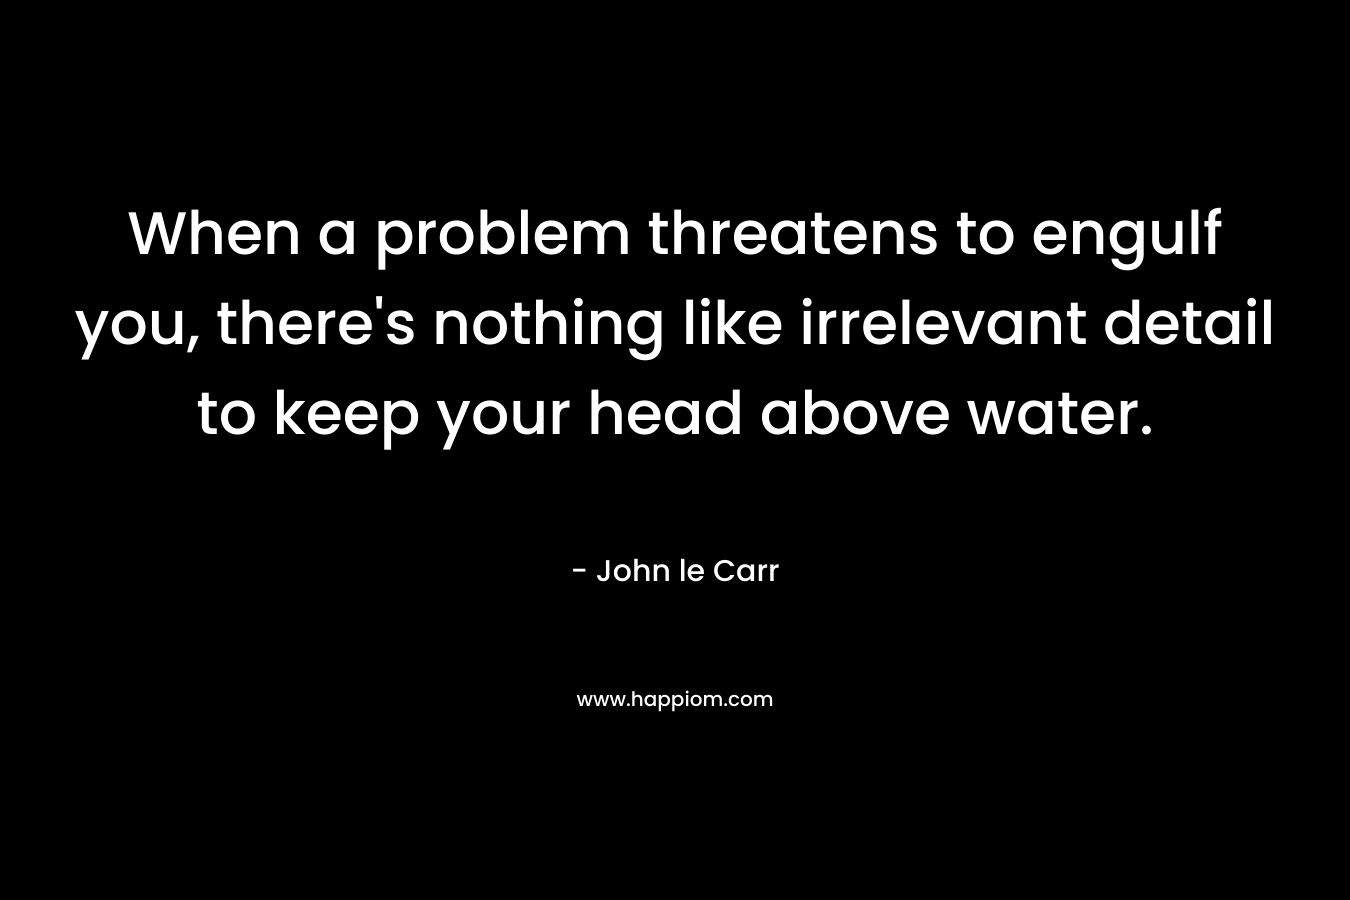 When a problem threatens to engulf you, there’s nothing like irrelevant detail to keep your head above water. – John le Carr